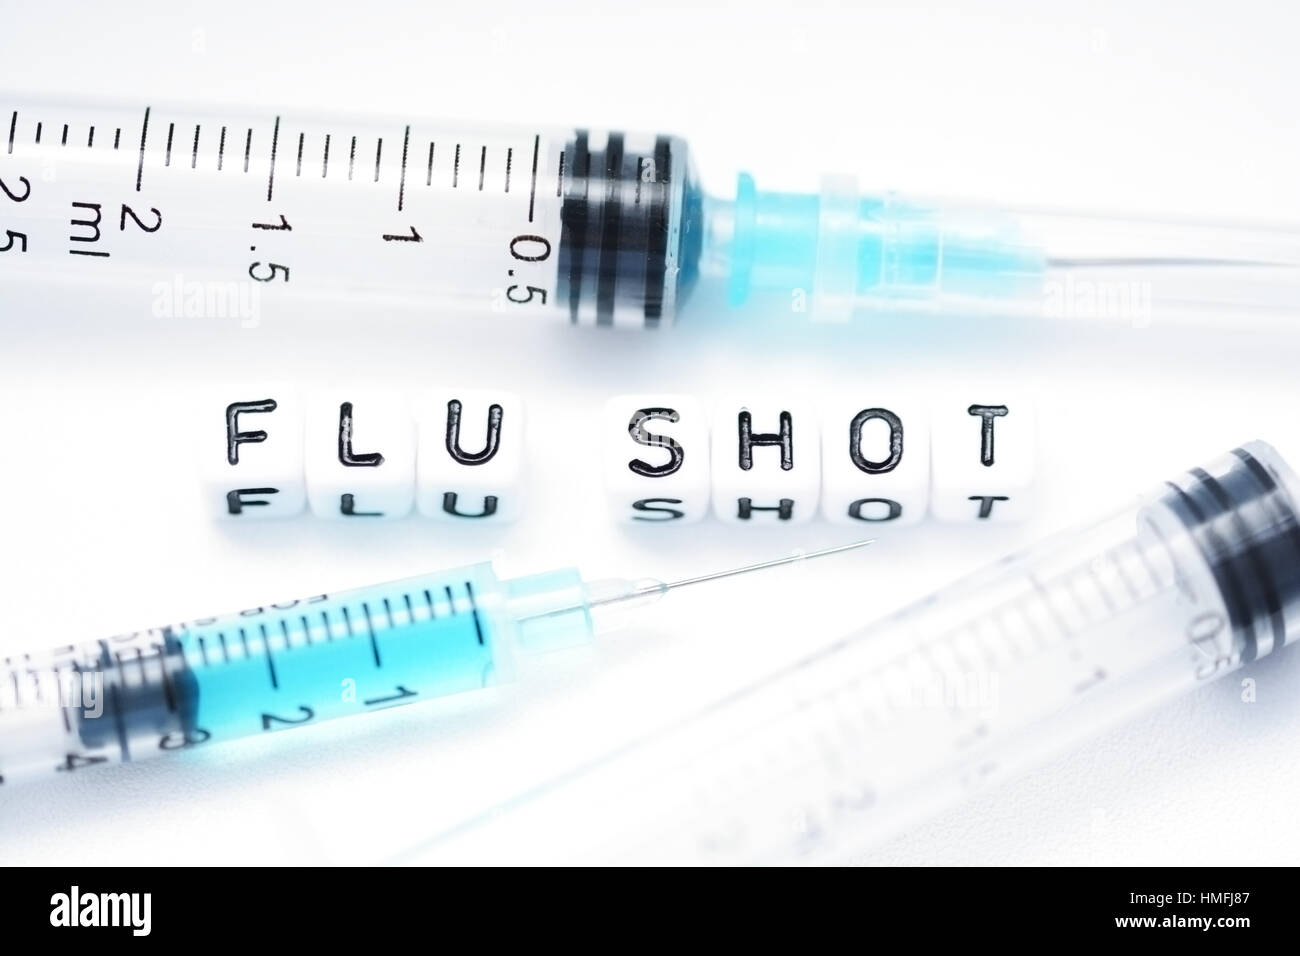 Flu shot text spelled with tiled plastic letters standing next to a syringe Stock Photo